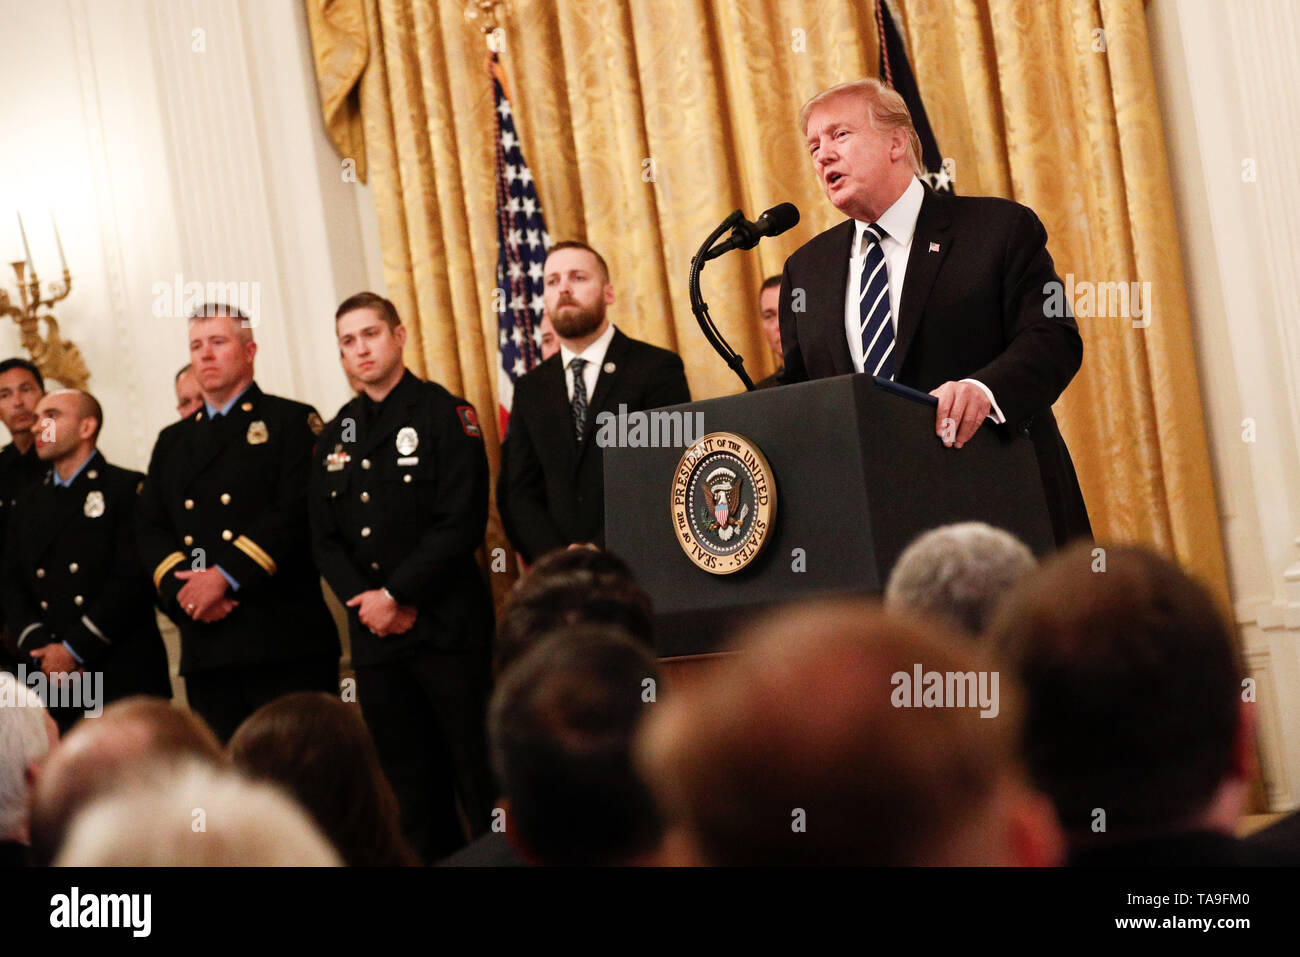 Washington, USA. 22nd May, 2019. U.S. President Donald Trump (1st R, back) speaks during the Public Safety Officer Medal of Valor presenting ceremony at the White House in Washington, DC, the United States, on May 22, 2019. Credit: Ting Shen/Xinhua/Alamy Live News Stock Photo